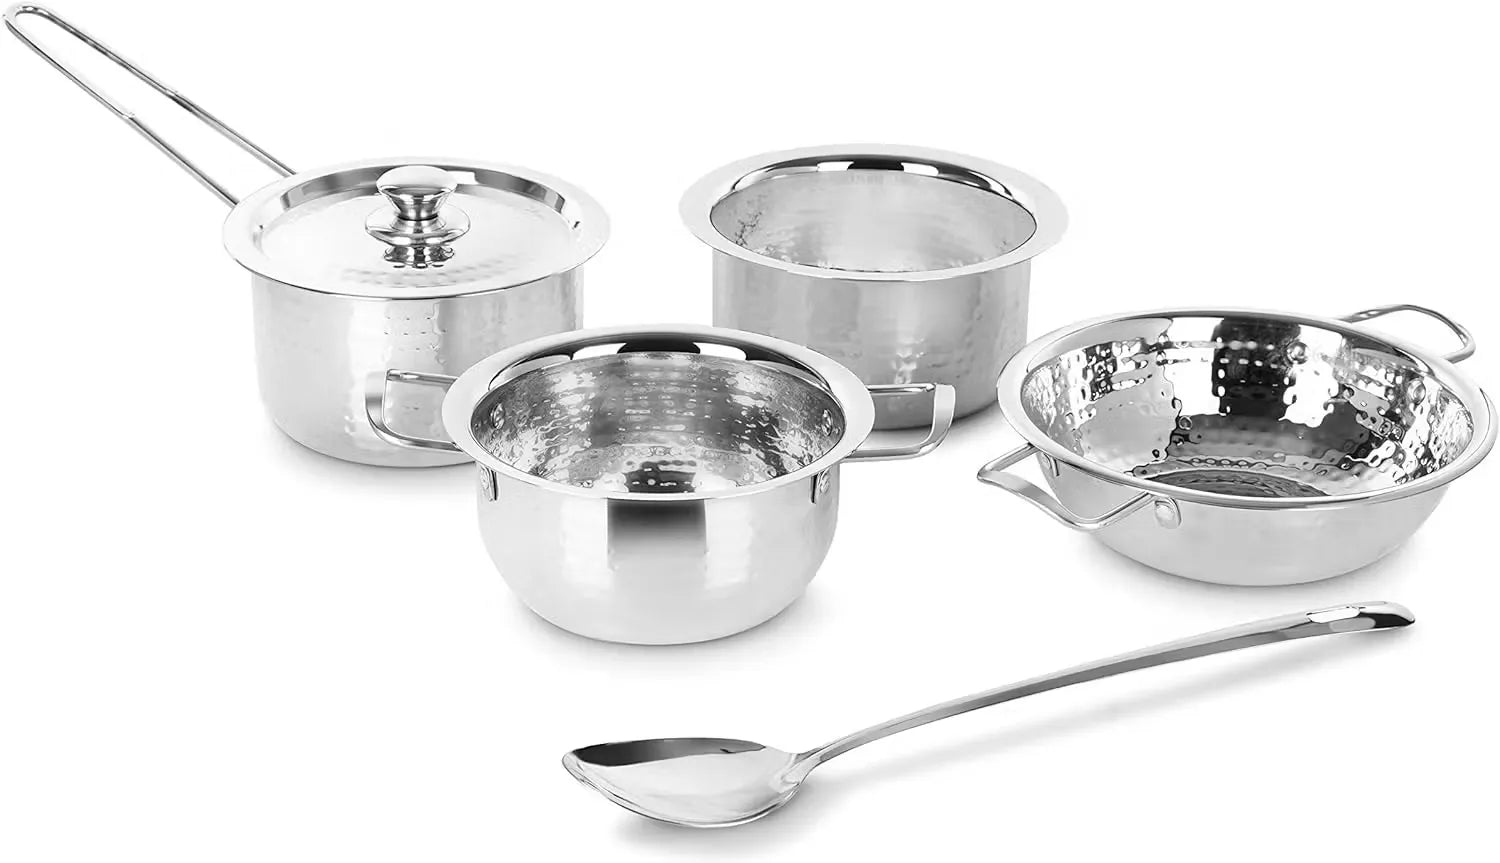 5-piece hammered cookware set adds elegance and performance to your kitchen. Stylish stainless steel cookware for everyday cooking with flair. Cookware set with unique hammered finish, perfect for memorable meals. Cook in style with this premium 5-piece set, combining beauty and functionality. Upgrade your kitchen and cook with distinction! Shop the Classic Essentials hammered cookware set.